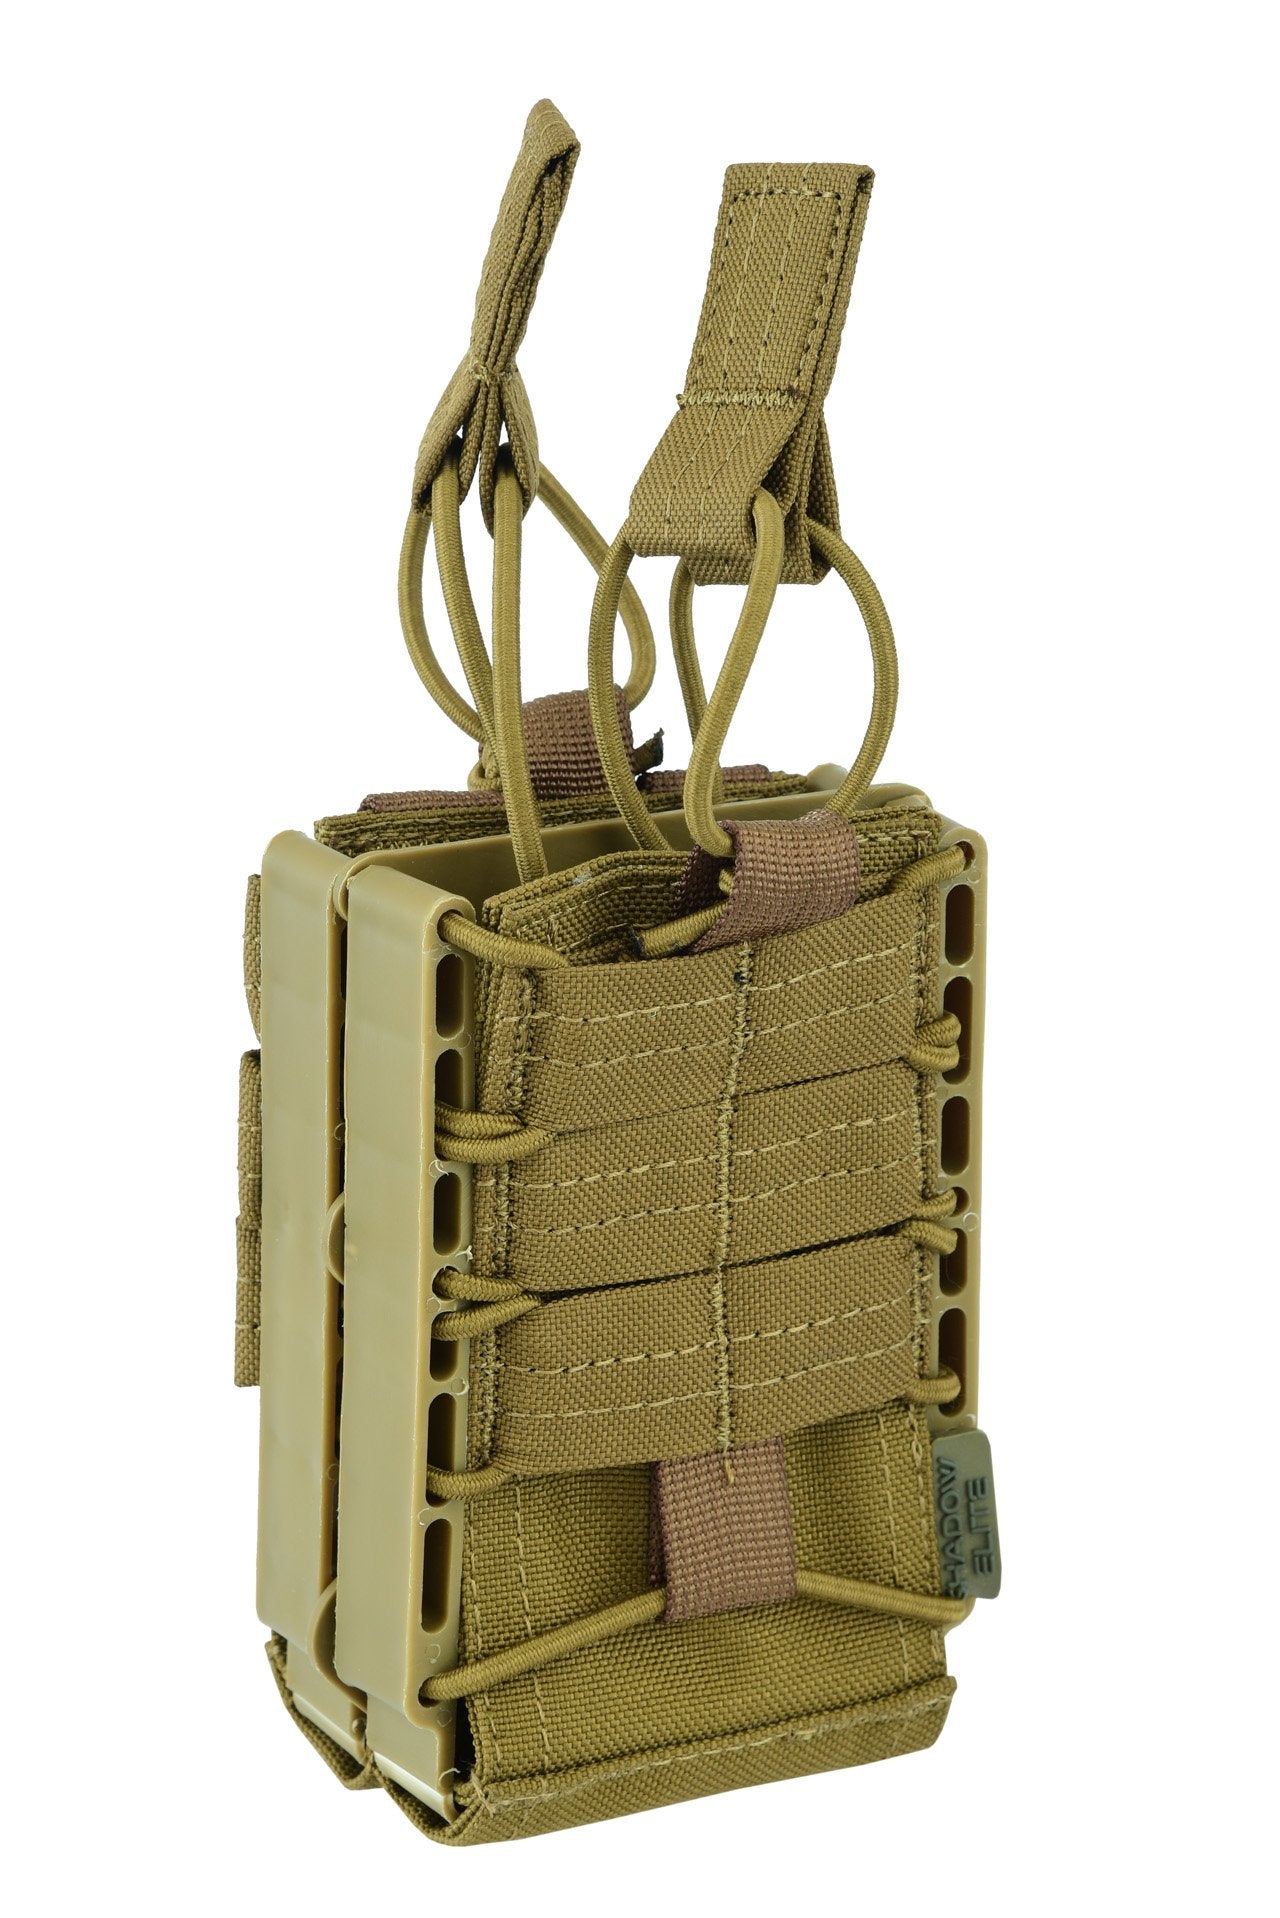 SHE-21020 Rapid Access Double Rifle Magazine Pouch COYOTE